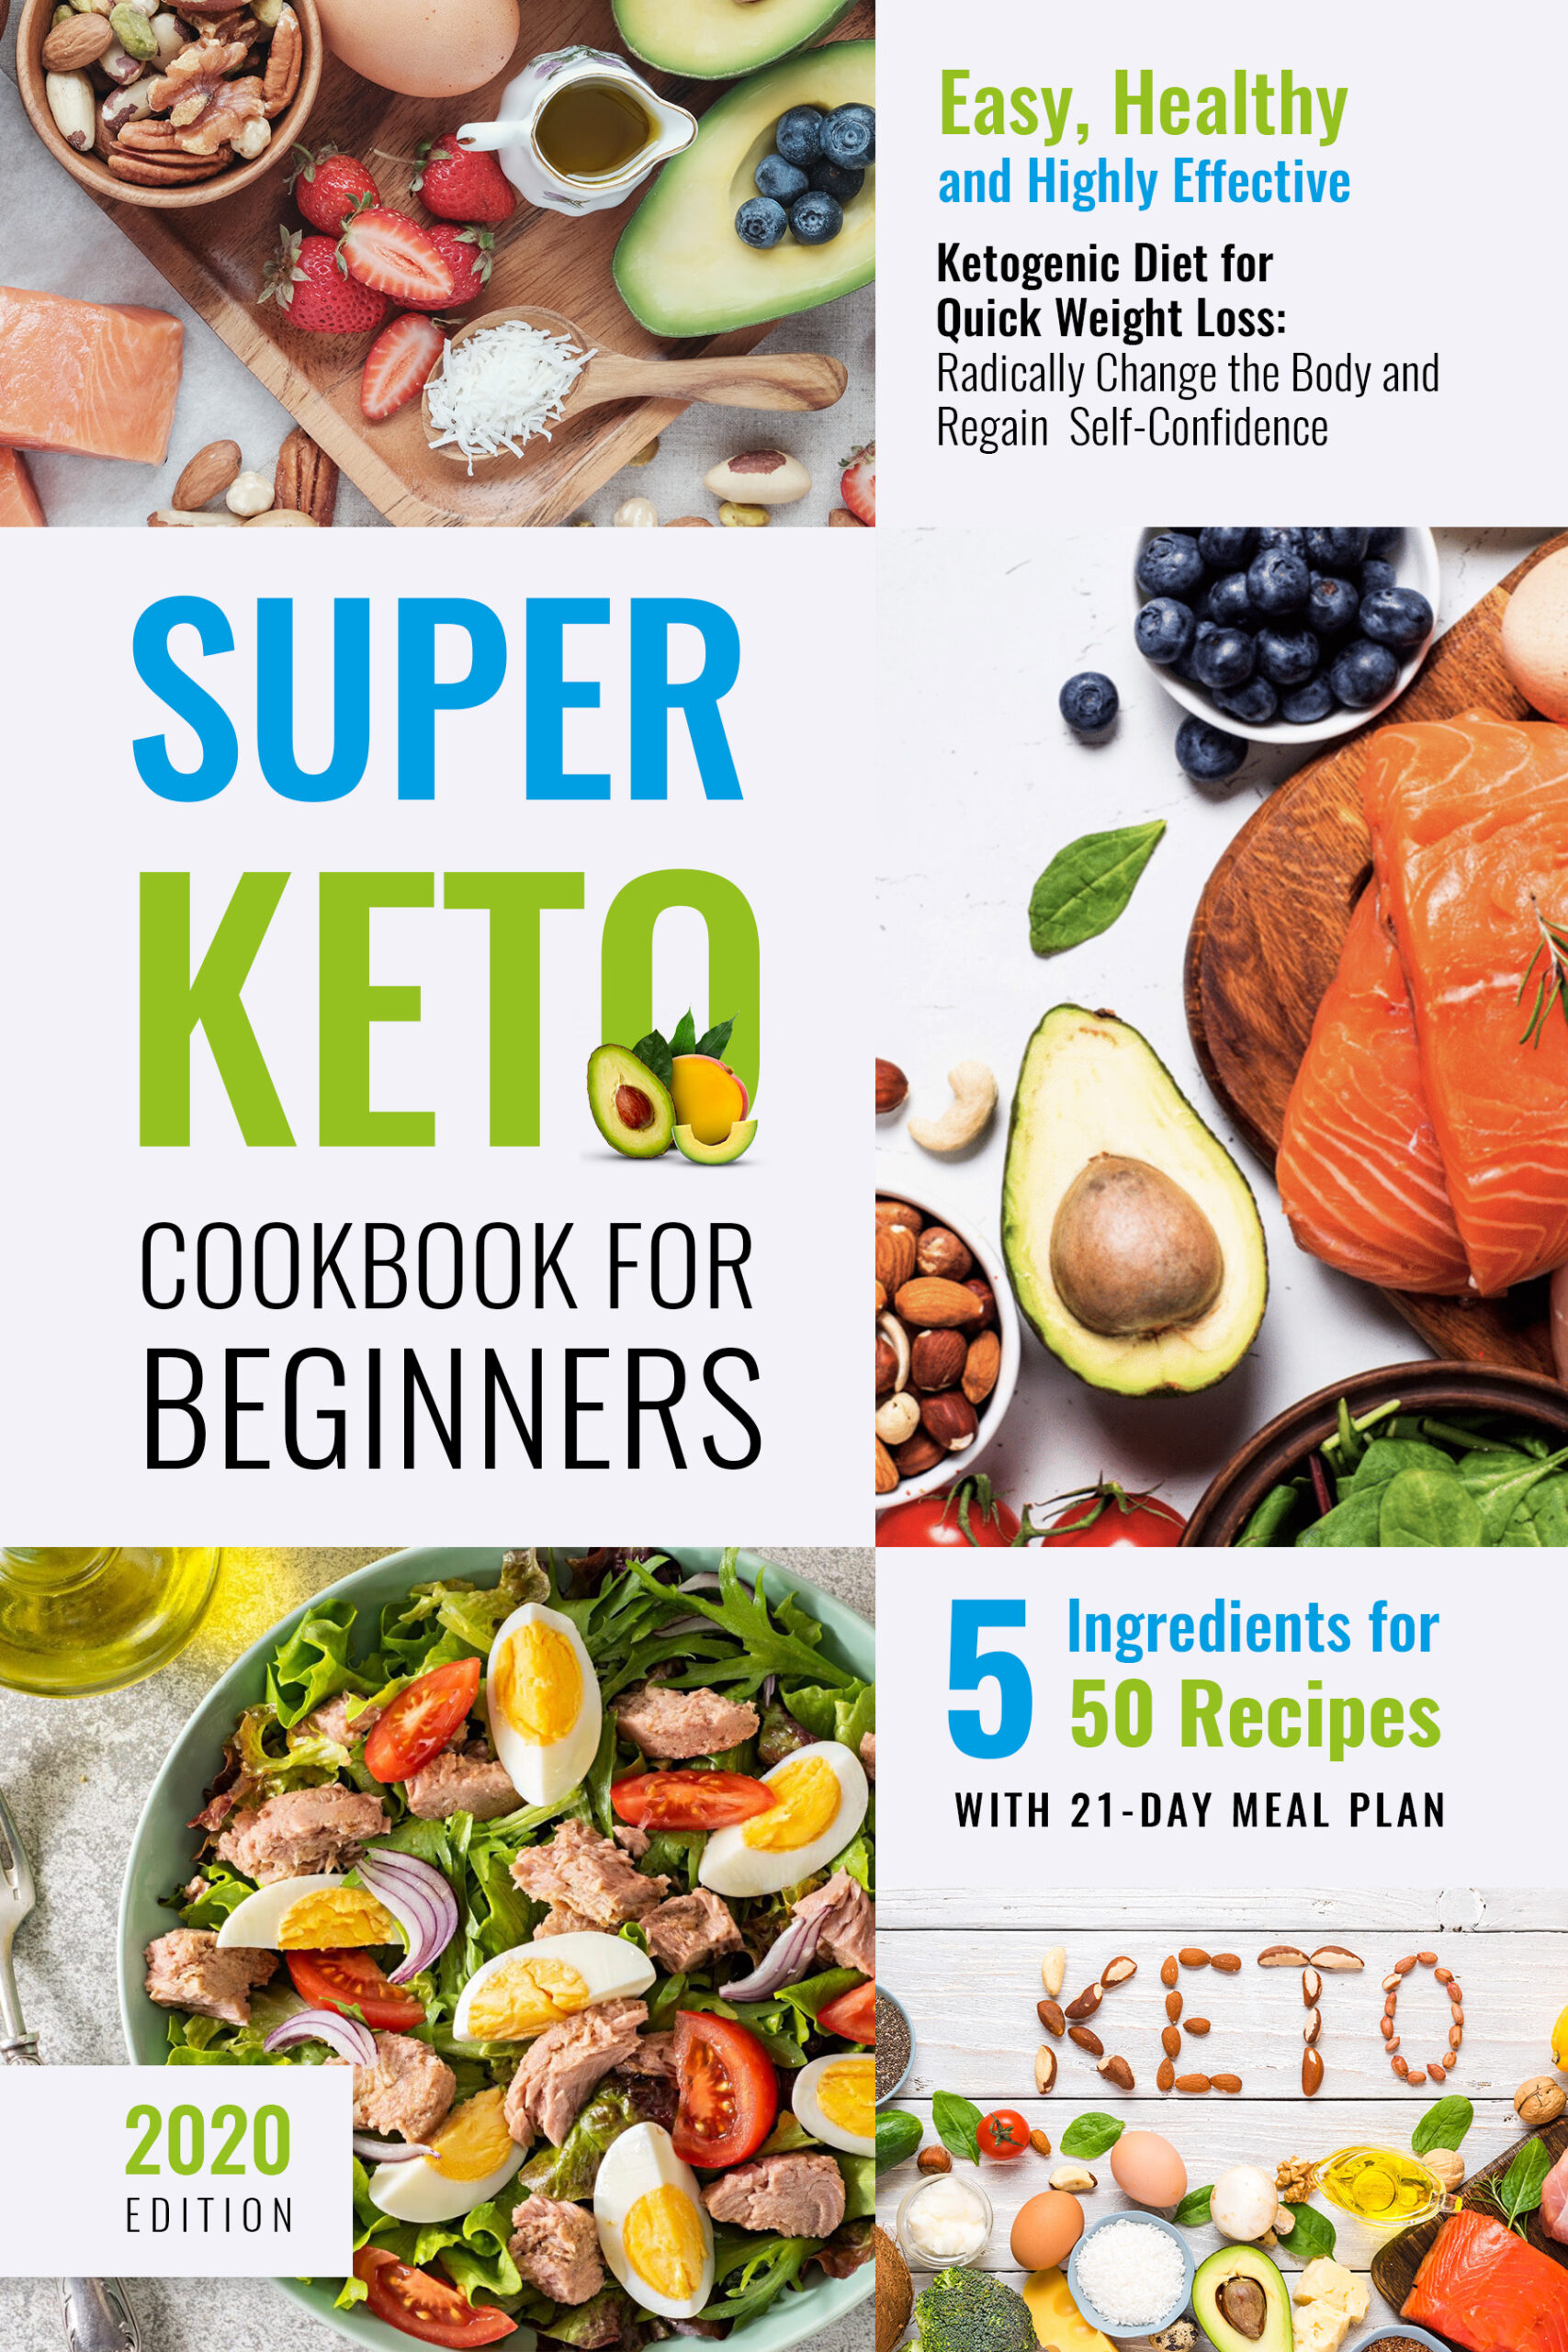 FREE: Super Keto Cookbook for Beginners 2020: Easy, Healthy, and Highly Effective Ketogenic Diet for Quick Weight Loss: Radically Change the Body and Regain Self-Confidence (5 Ingredients for 50 Recipes) (with 21-Day Meal Plan) by Elena Troyanskaya by Elena Troyanskaya